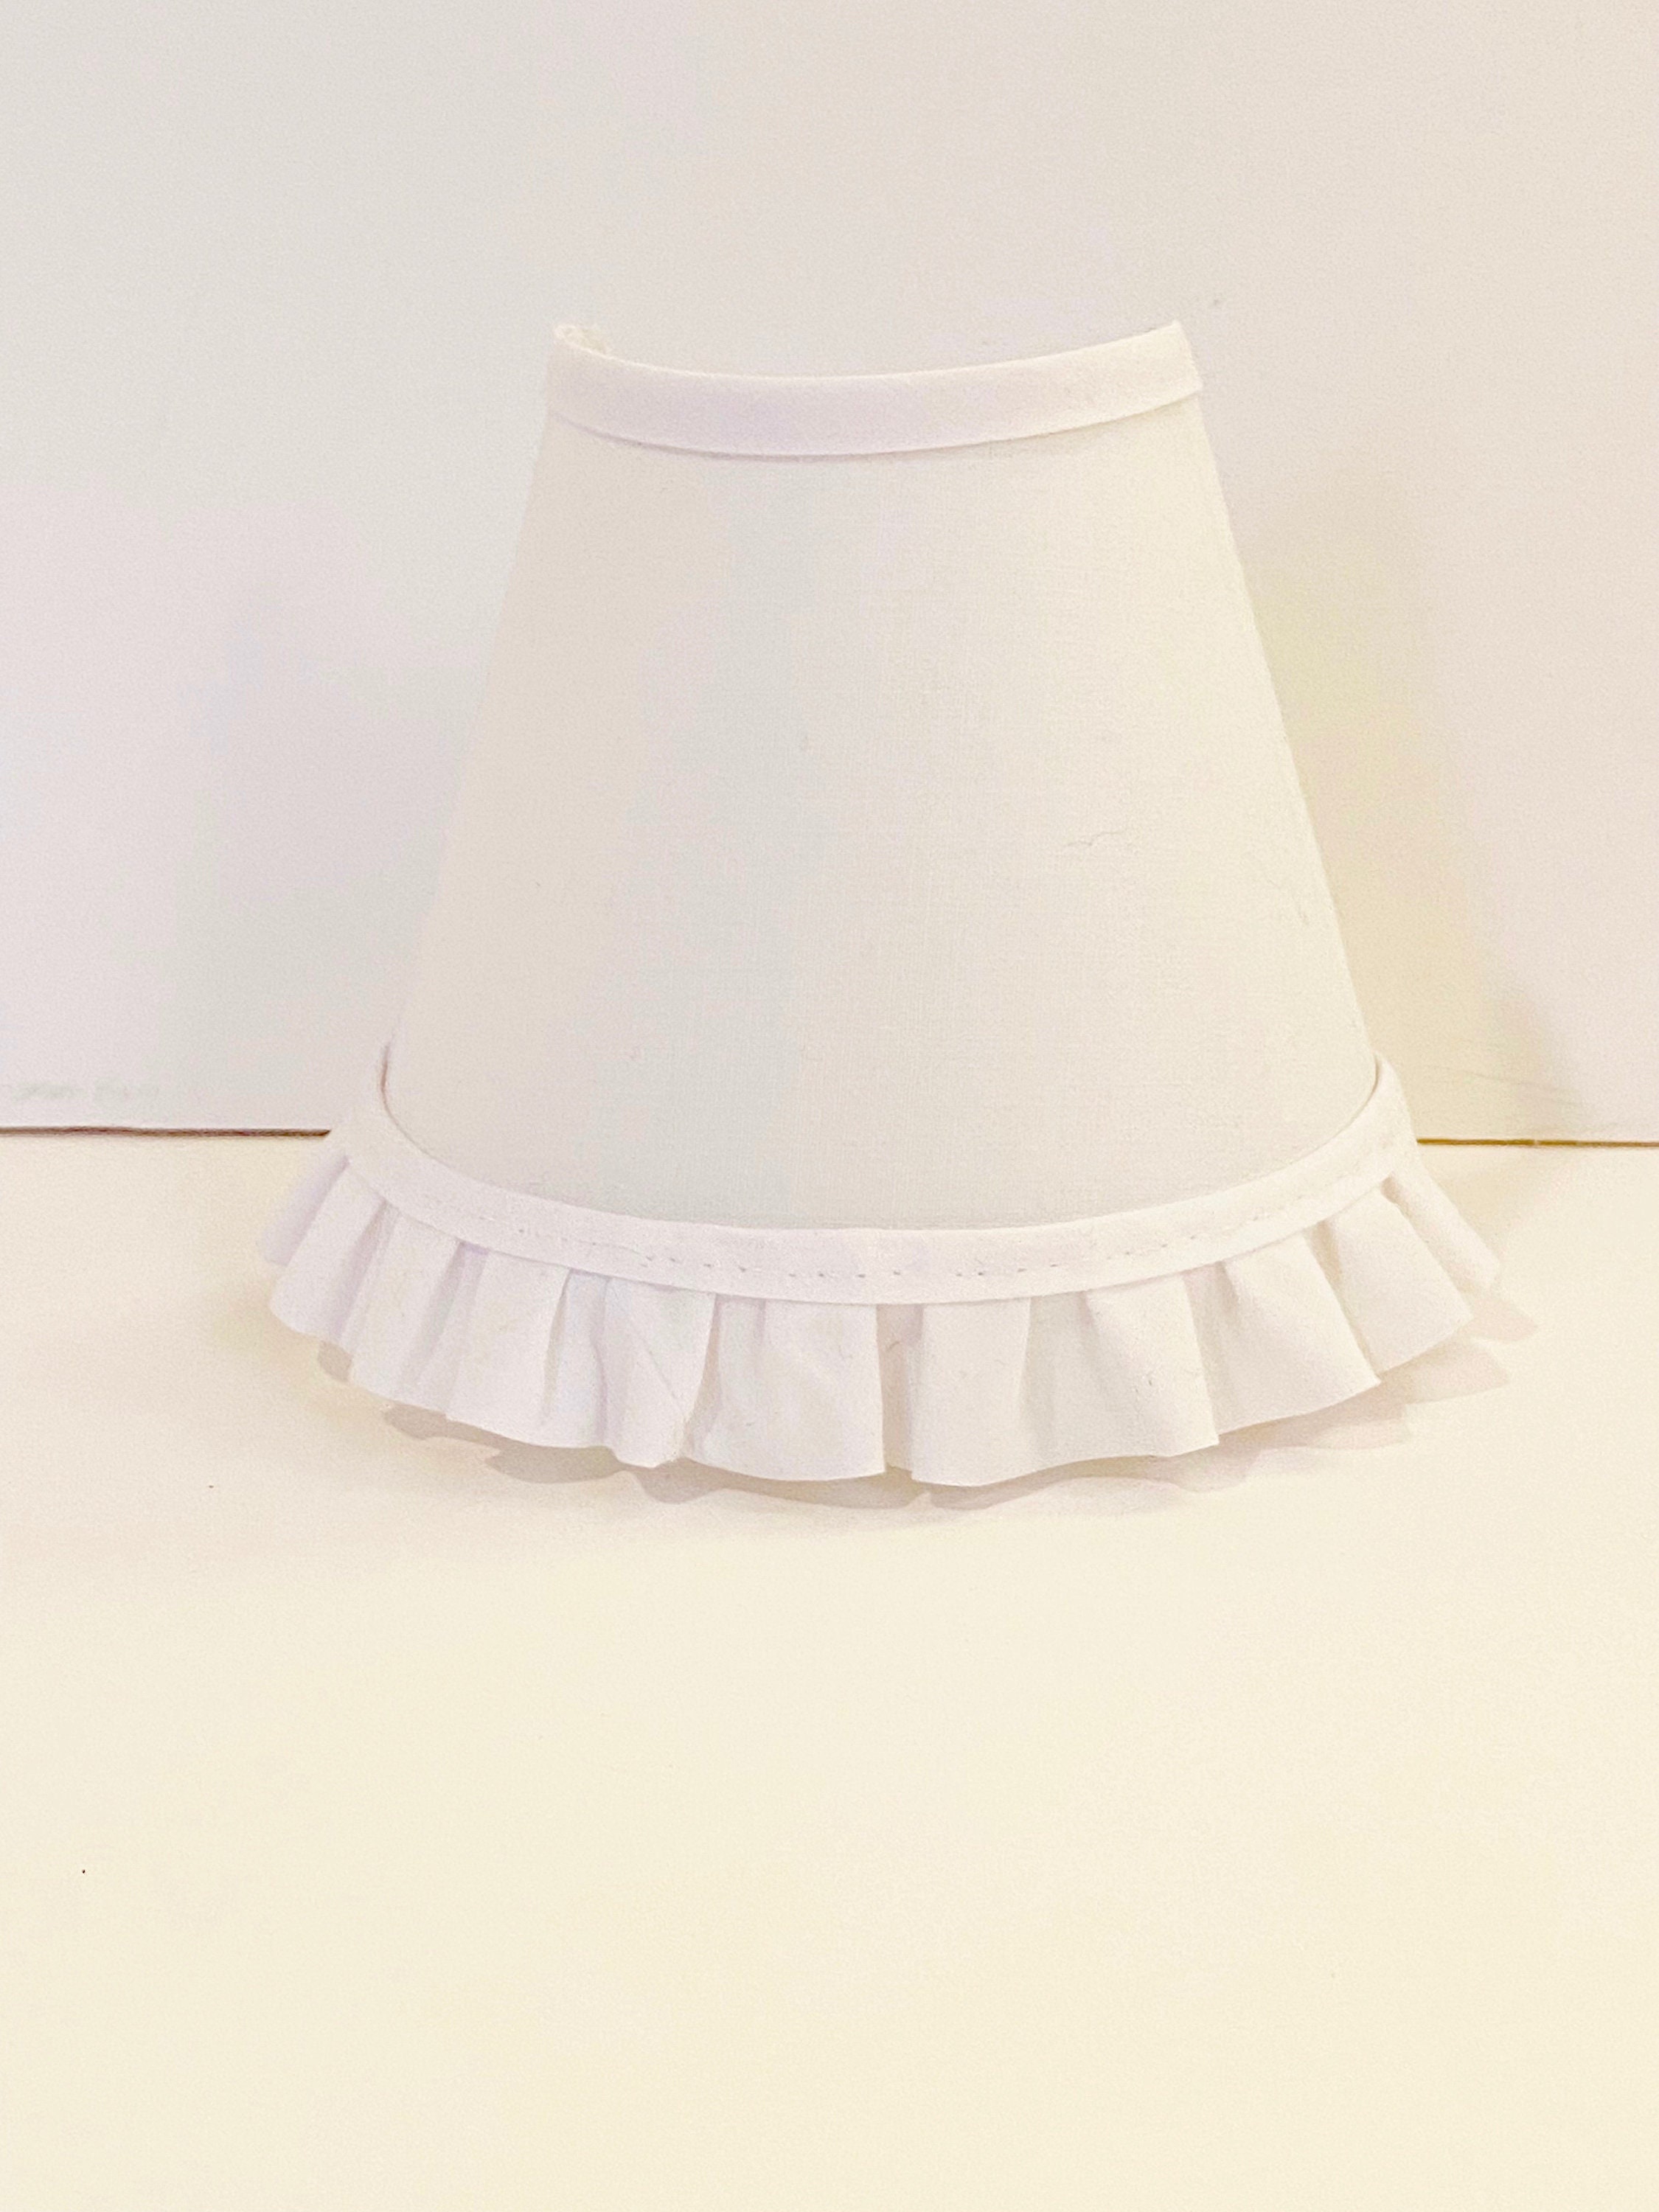 Free: WHITE SATIN RUFFLE TRIM 21 YARDS! - Sewing -  Auctions for  Free Stuff